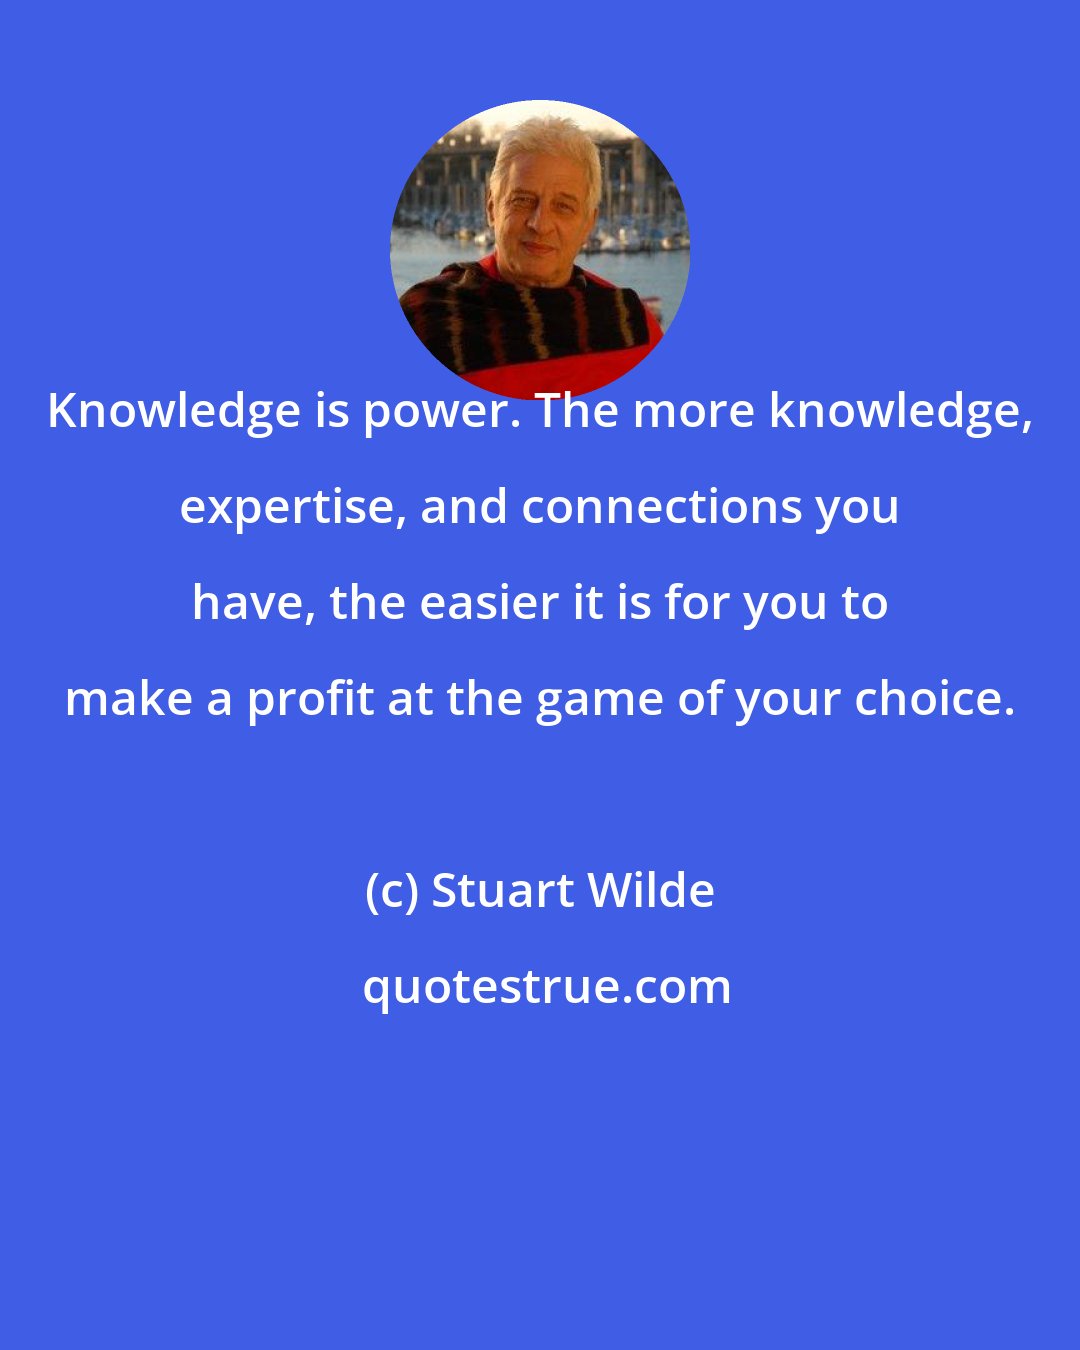 Stuart Wilde: Knowledge is power. The more knowledge, expertise, and connections you have, the easier it is for you to make a profit at the game of your choice.